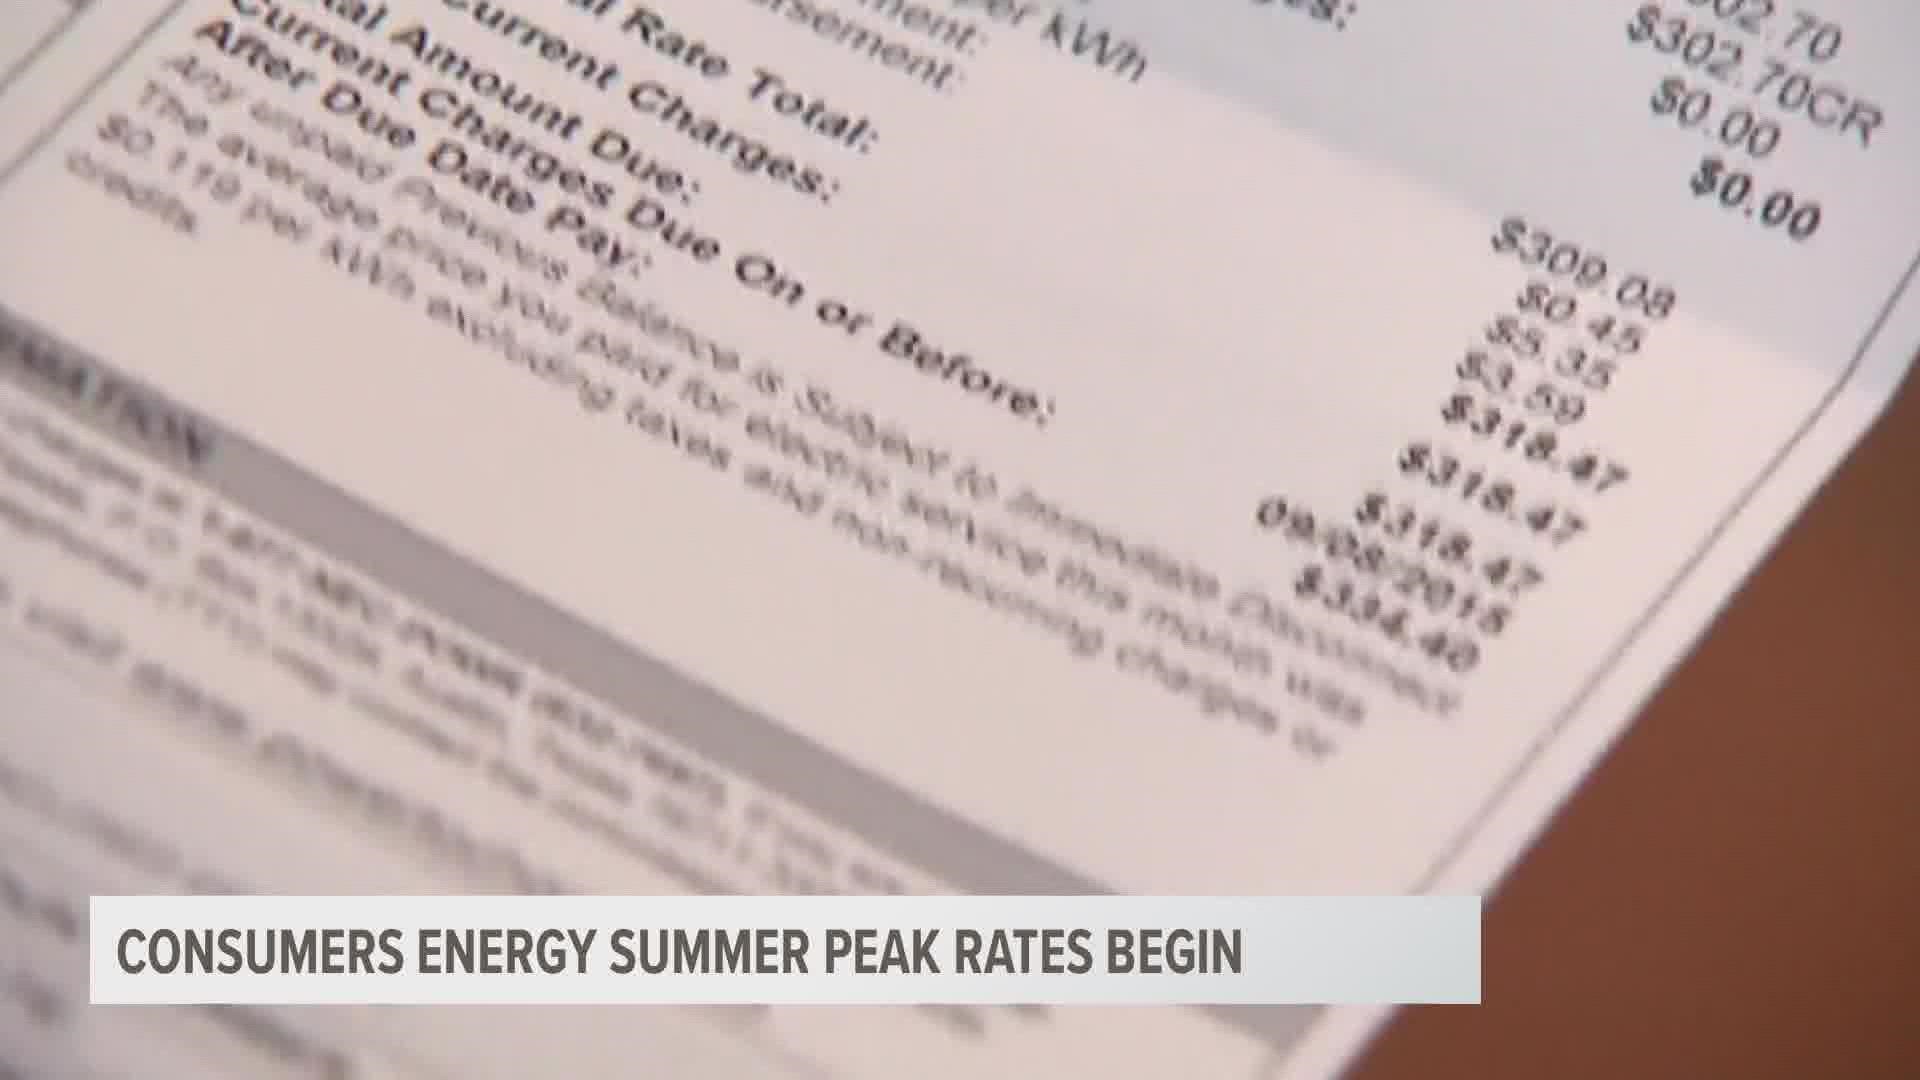 Starting June 1 and lasting through September 30, energy rates will be 50% higher between the hours of 2 p.m. and 7 p.m. Monday through Friday.